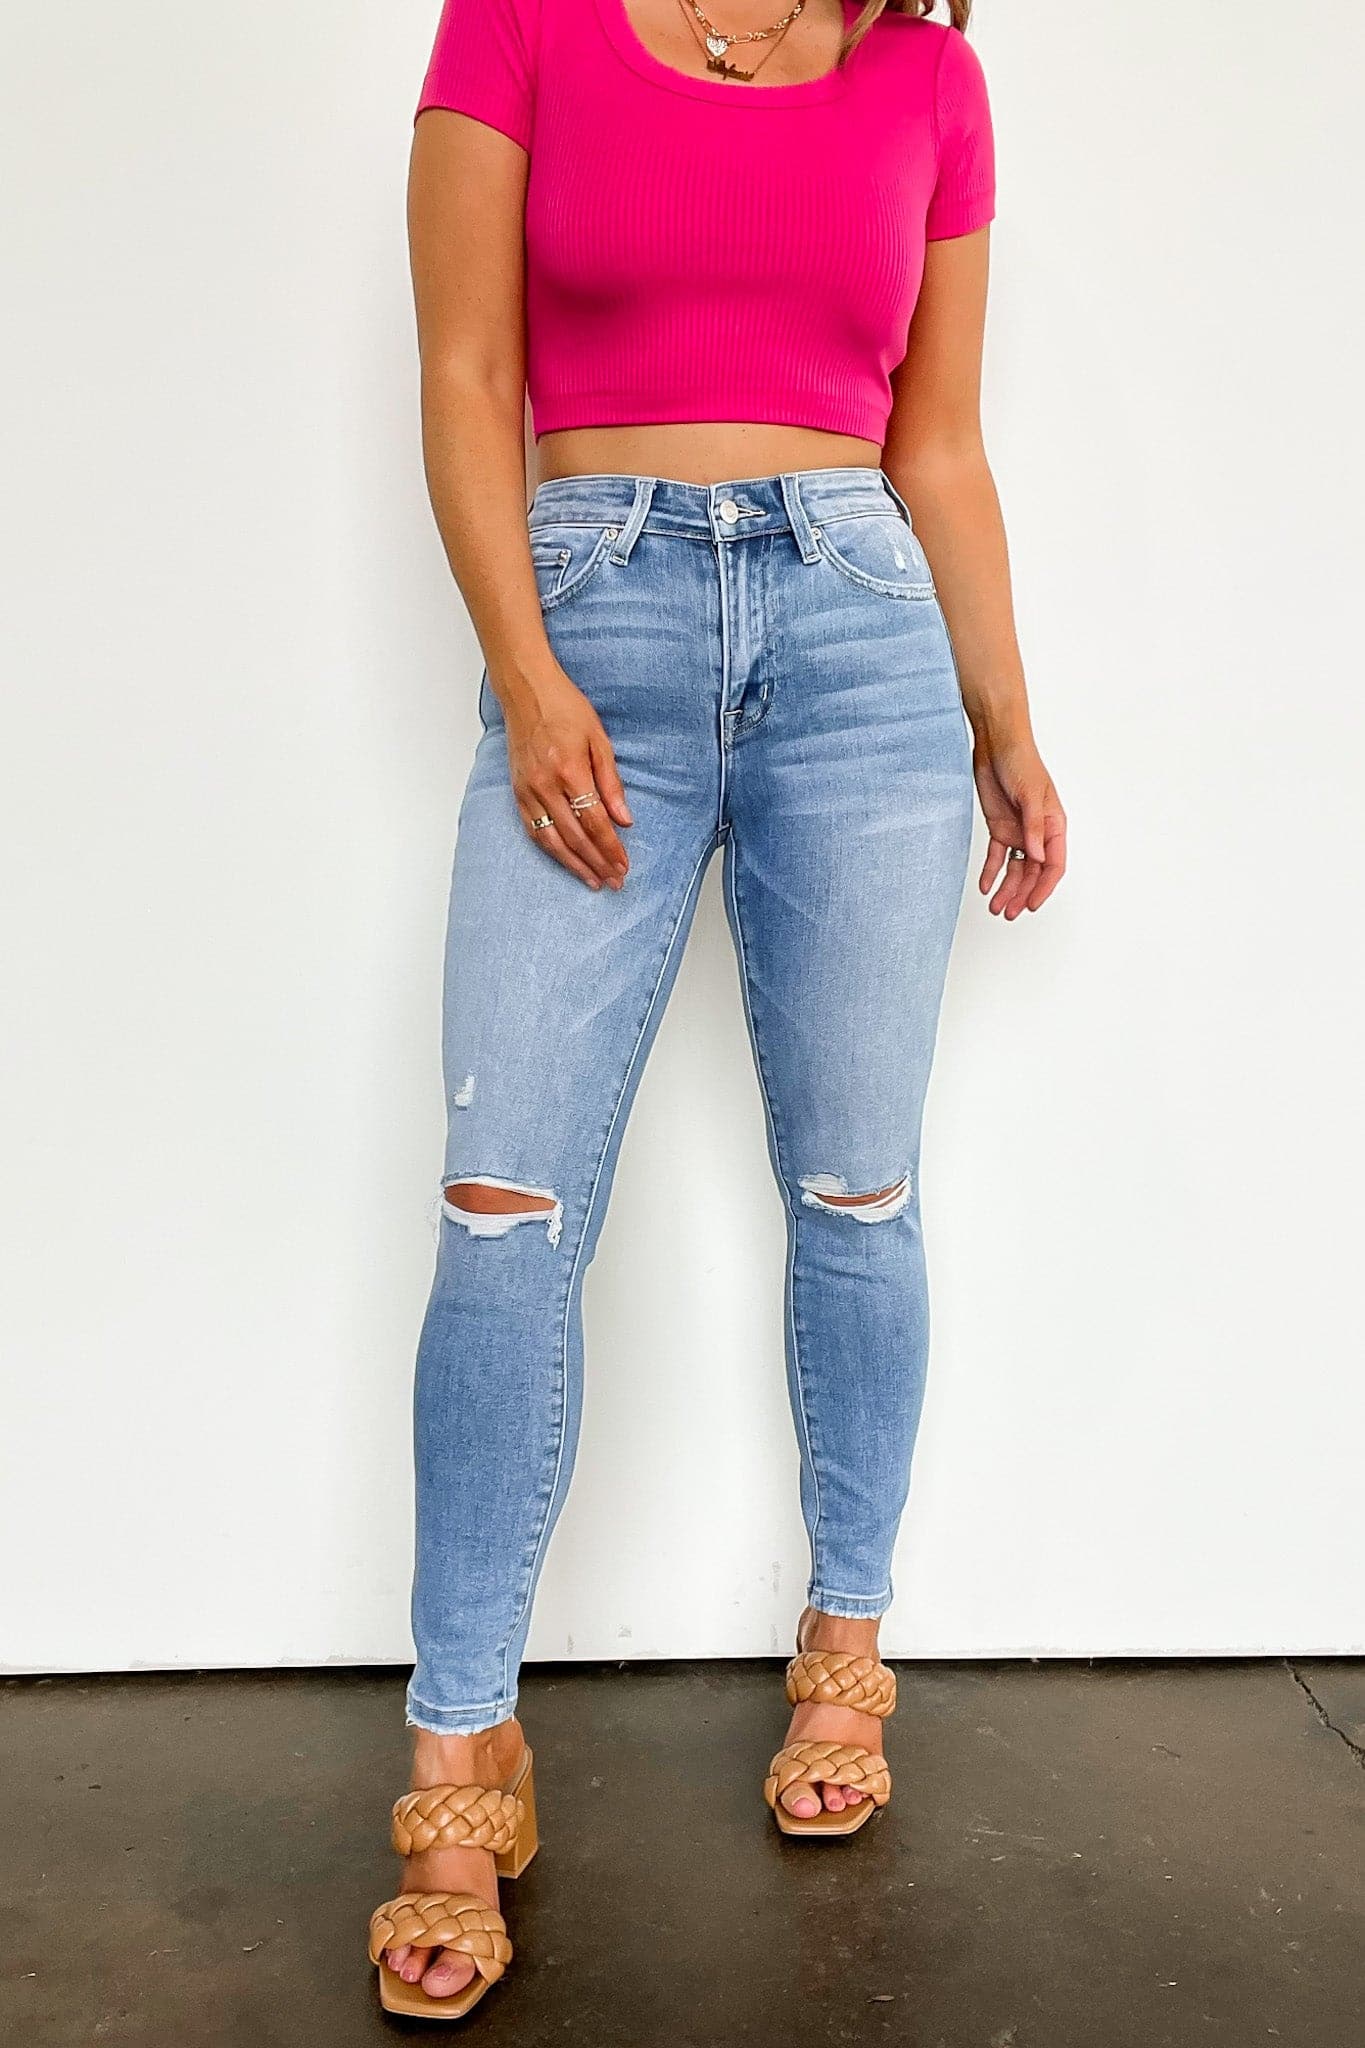 25 / Light Lauer High Rise Distressed Cropped Skinny Jeans - BACK IN STOCK - kitchencabinetmagic